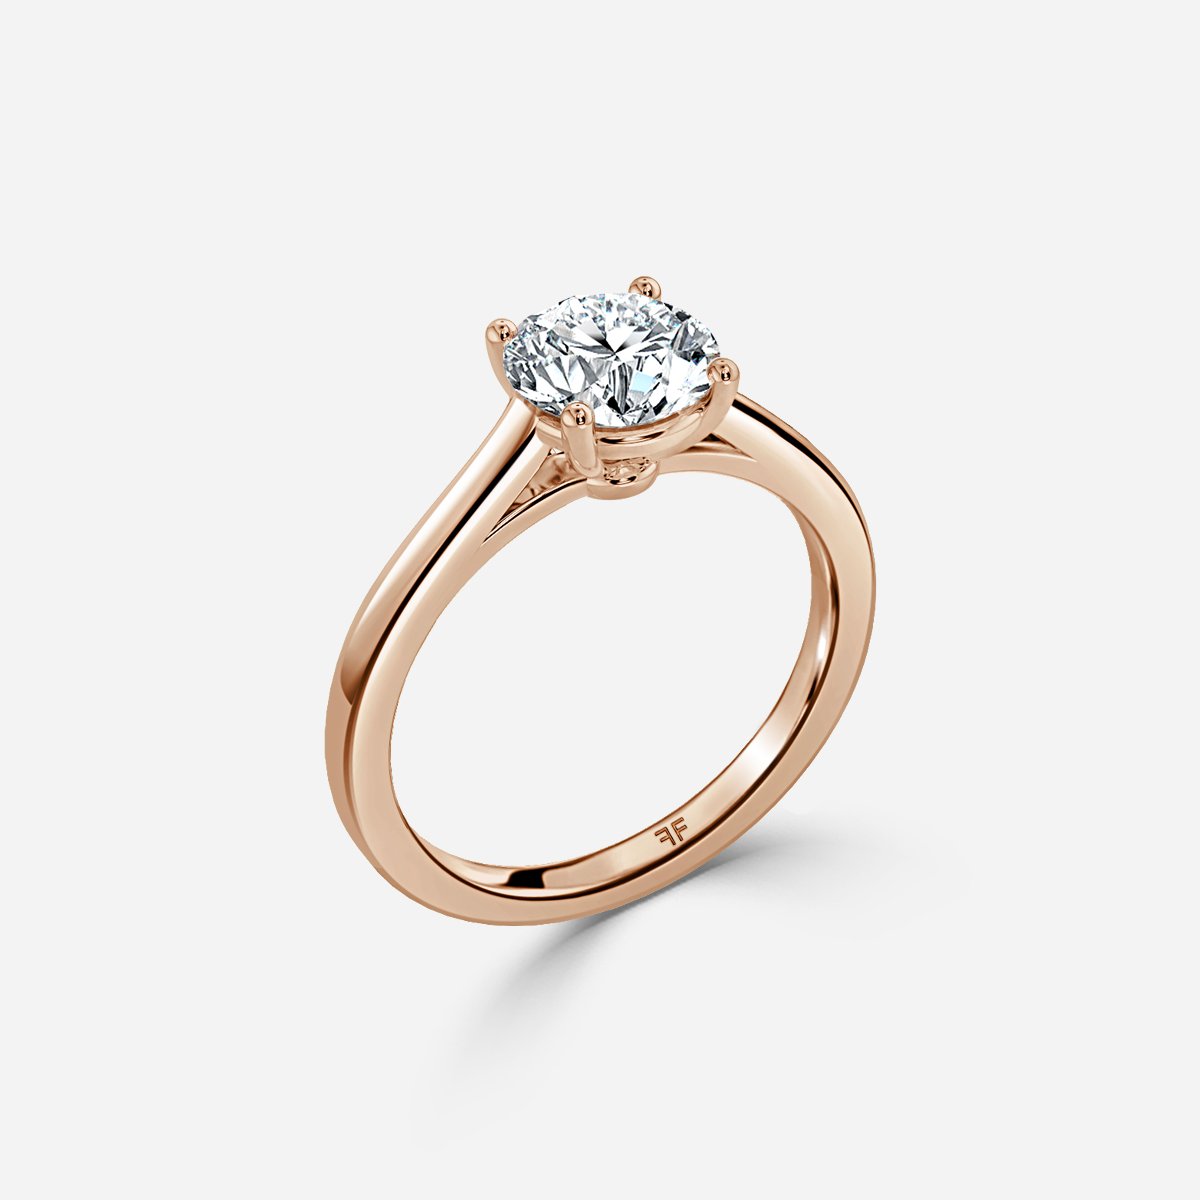 Sabene Rose Gold Solitaire Engagement Ring